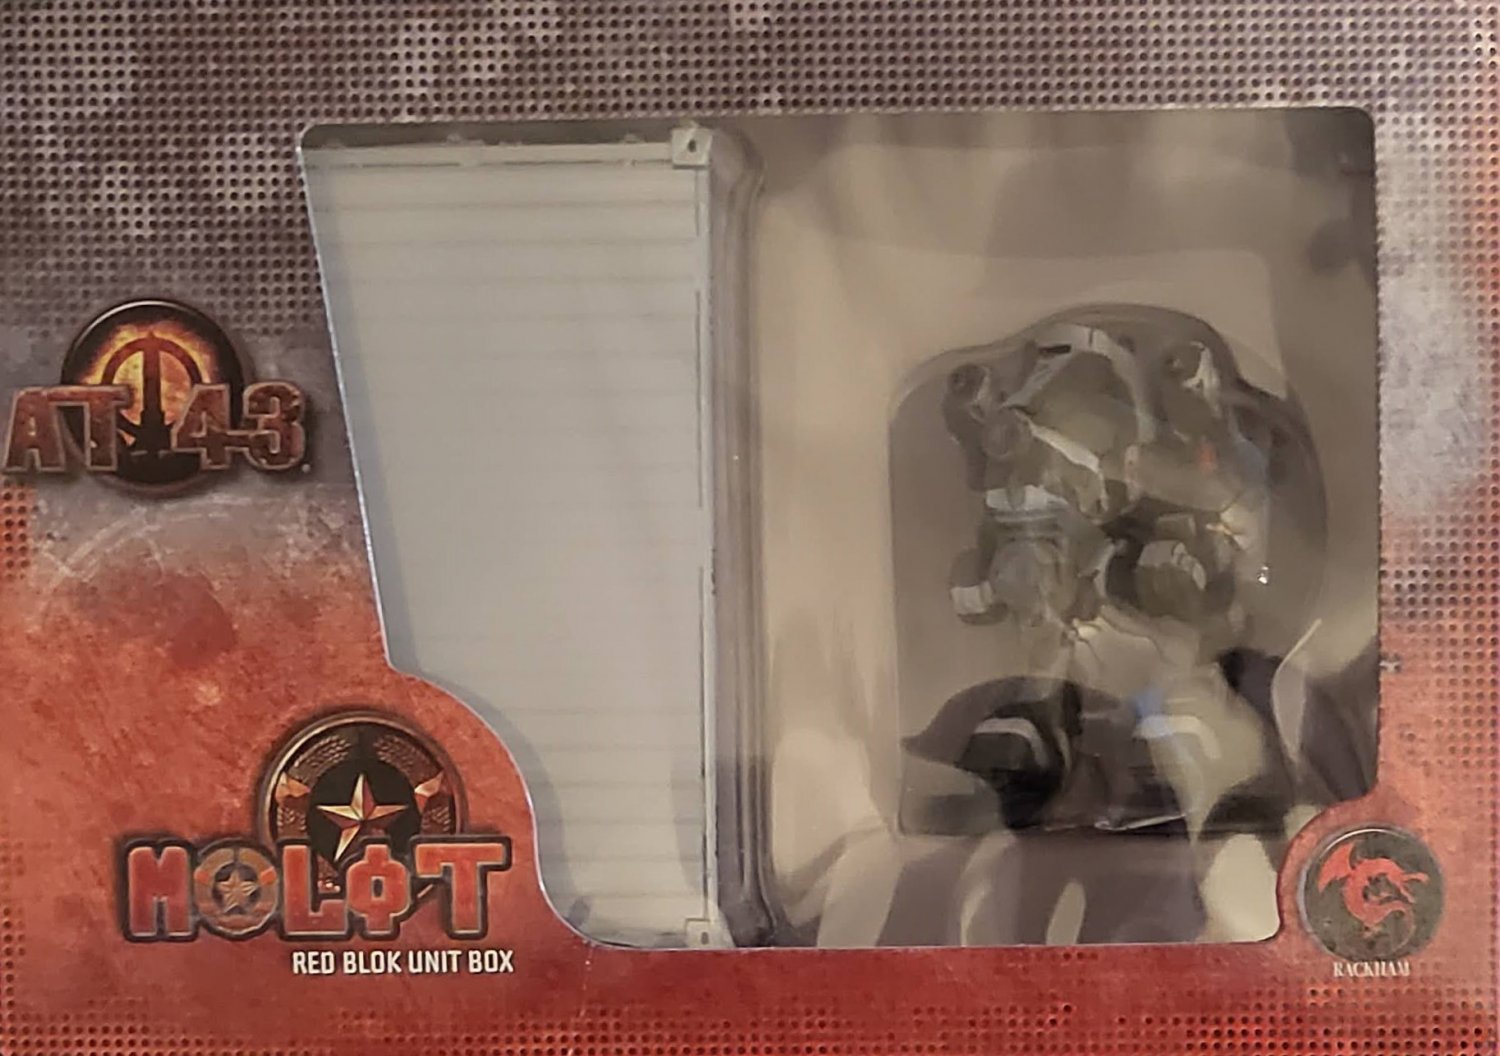 AT-43 Therians Wraith Golgoth Red Version OPEN BOX WITH CARDS